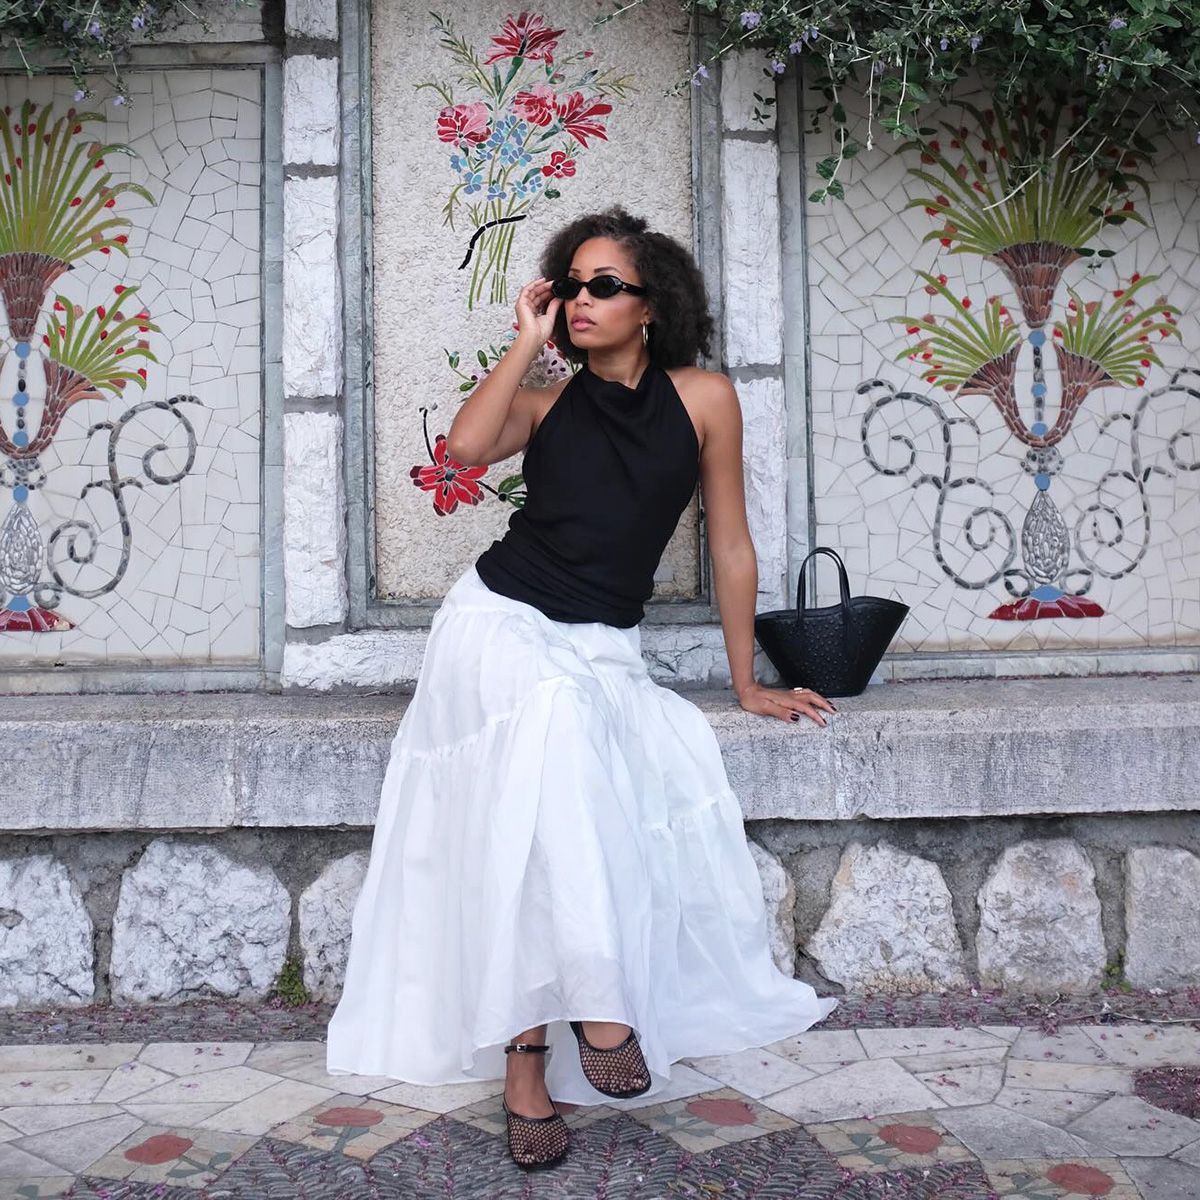 7 Shoe Trends to Wear With Full Skirts